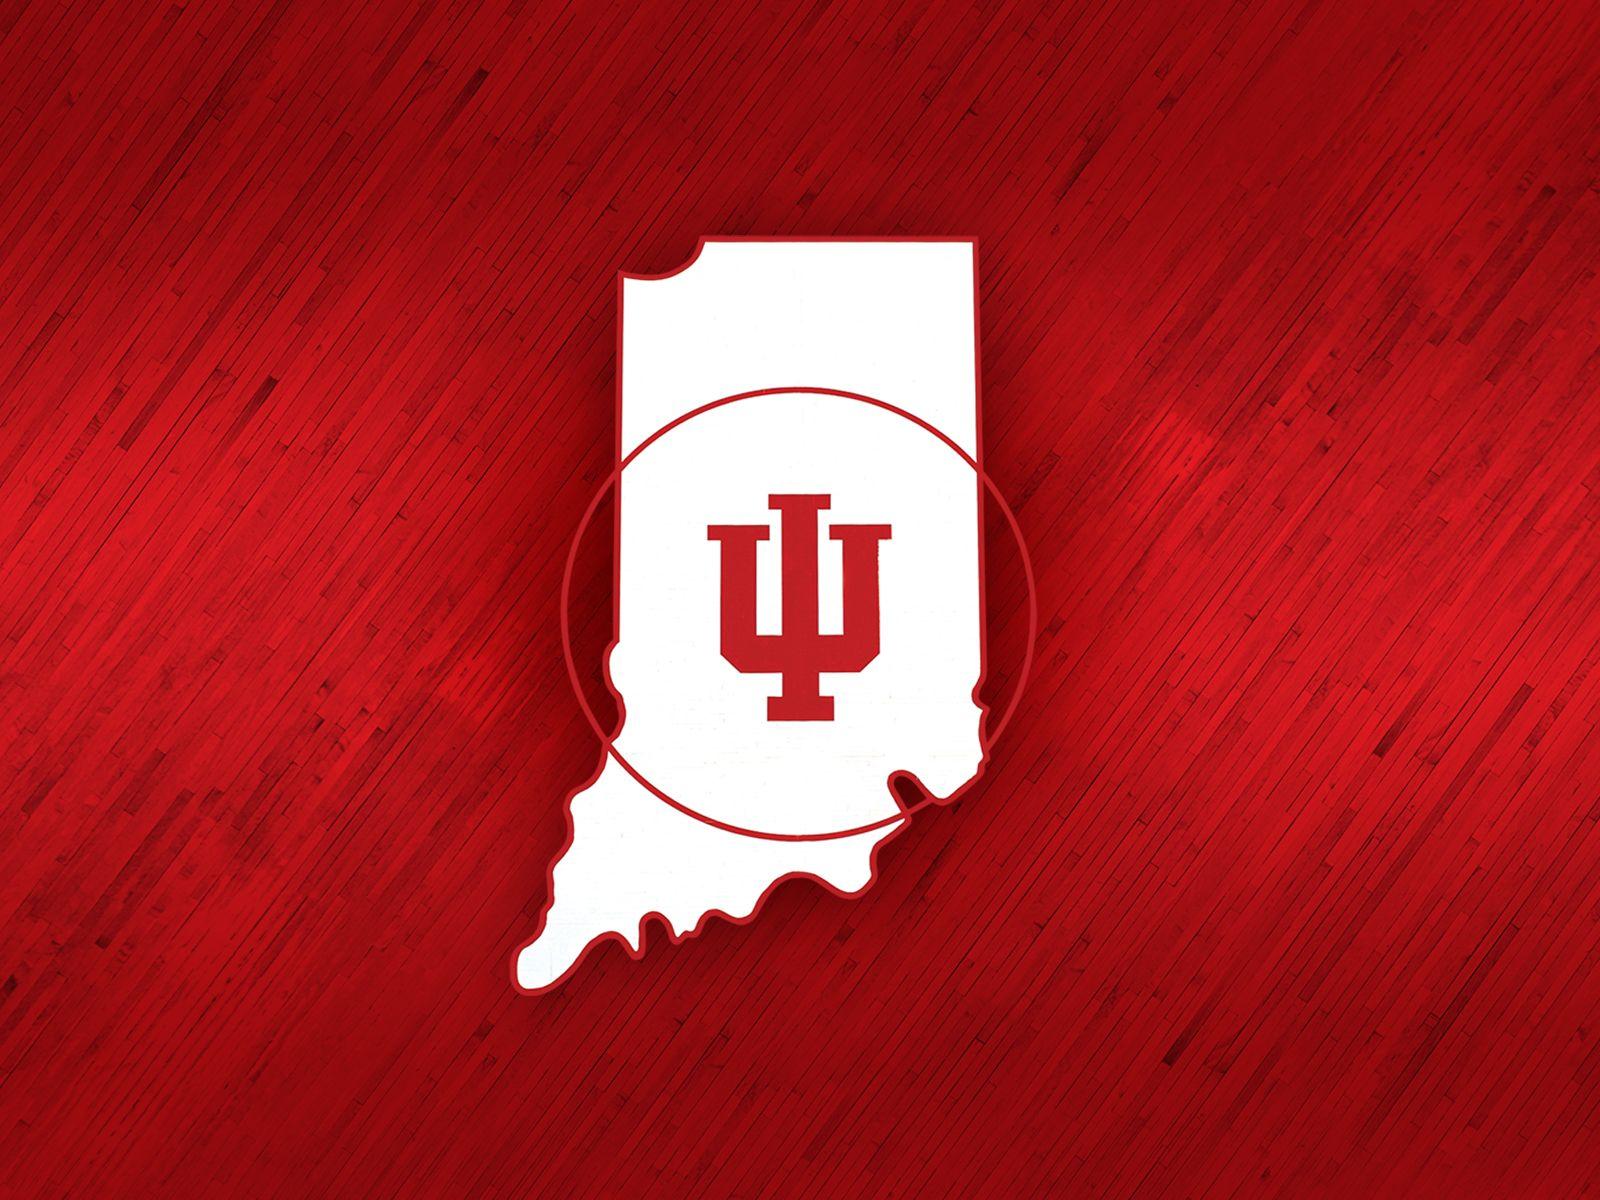 IU Logo - Mold Problems Continue in IU Dorms, University Working to Address It